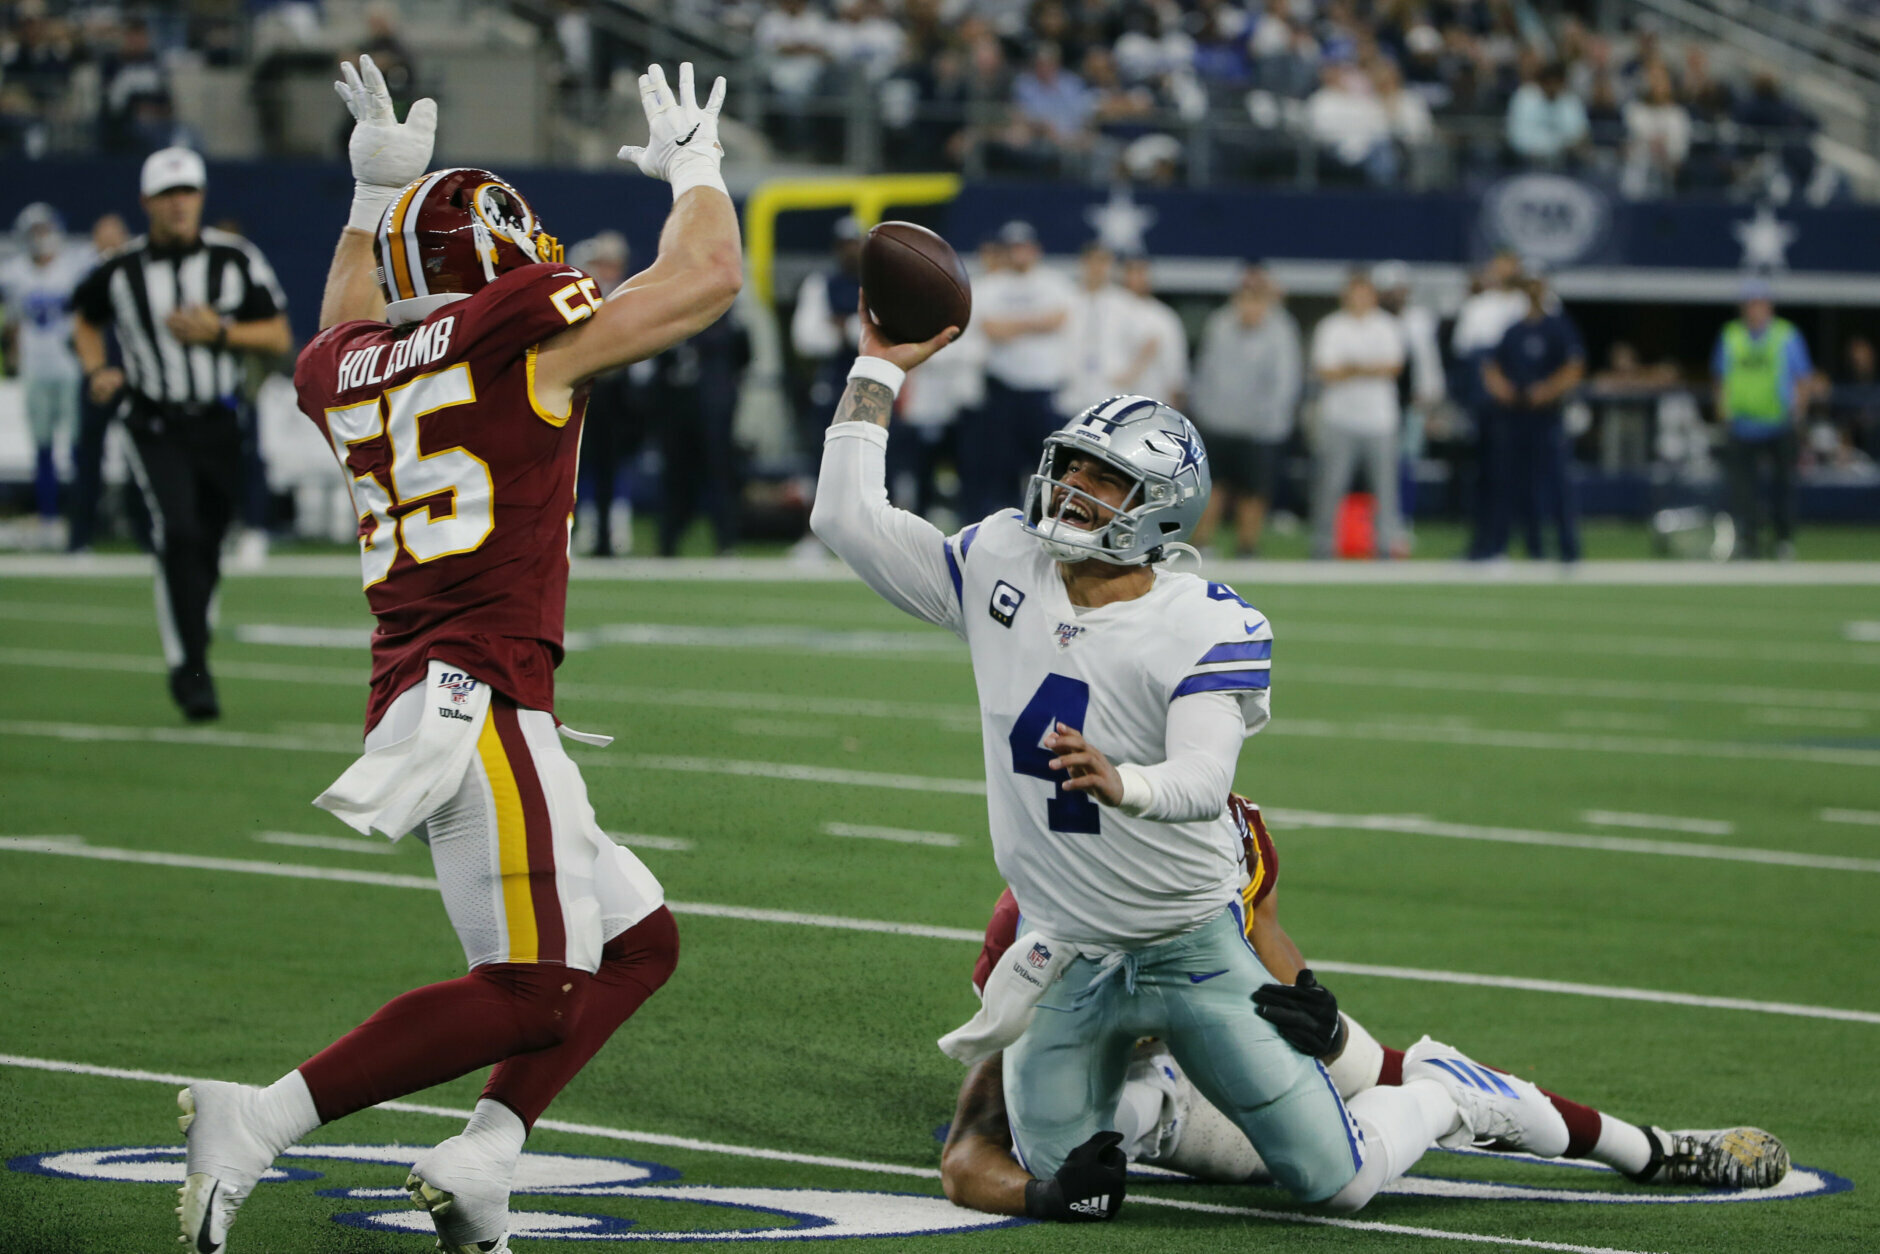 <p><b><i>Redskins 16</i></b><br />
<b><i>Cowboys 47</i></b></p>
<p>Dak Prescott may have lit up an injury-riddled Redskins secondary, but he came up short <a href="https://profootballtalk.nbcsports.com/2019/12/29/dak-prescott-finishes-just-short-of-tony-romos-team-passing-yards-mark/" target="_blank" rel="noopener">in more ways than one</a>. Not only was Sunday&#8217;s victory in vain, but the Cowboys&#8217; +113 point differential is the second-best in NFL history for a nonwinning team, sparking the likelihood for big changes in Big D. Hell, Dak&#8217;s worthiness of a big contract might also be on <a href="https://profootballtalk.nbcsports.com/2019/12/23/jerry-jones-coaching-change-not-a-focus-but-radar-is-turned-on/" target="_blank" rel="noopener">Jerry Jones&#8217; radar</a>.</p>
<p>Of course, we know Washington is about to undergo a Jerry-esque face-lift. Fresh off the Skins&#8217; 10th straight loss in-division, Riverboat Ron Rivera seems ready to <a href="https://www.nbcsports.com/washington/redskins/report-ron-rivera-top-candidate-become-next-redskins-head-coach" target="_blank" rel="noopener">gamble on the vacant head coaching position</a>, only the tip of the iceberg for a lost franchise set to <a href="https://www.espn.com/nfl/story/_/id/28385206/source-bruce-allen-no-longer-running-redskins-football-operations" target="_blank" rel="noopener">change its front office structure</a> and a chunk of its roster. As usual, the Redskins&#8217; offseason should be much more fun than actually watching them play football.</p>
